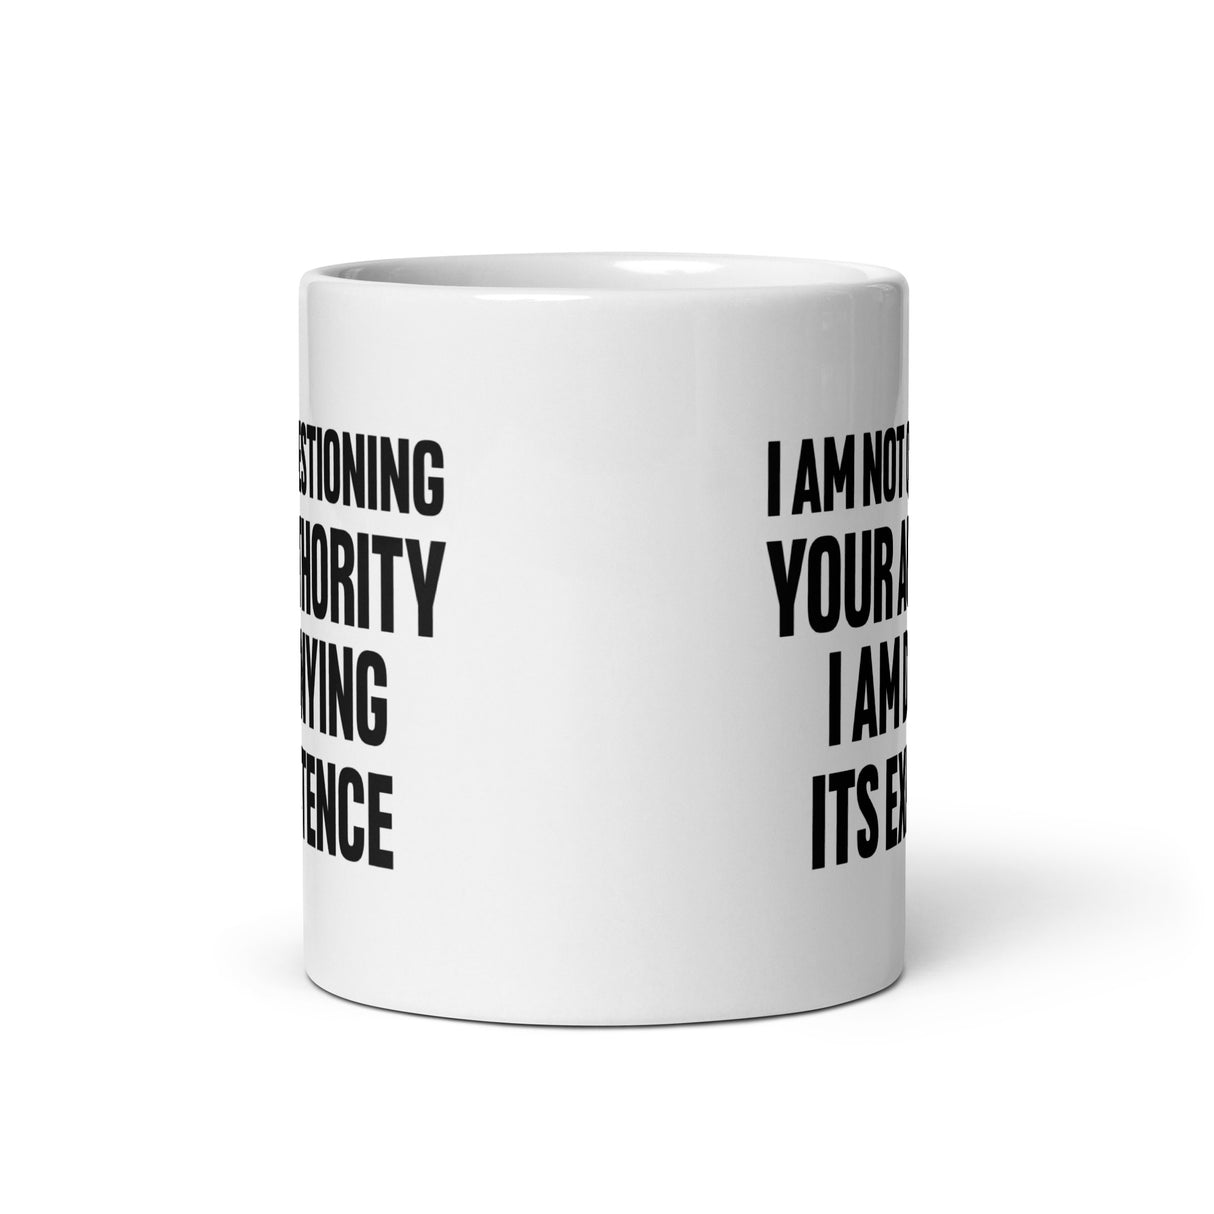 I Deny Your Authority Coffee Mug - Libertarian Country